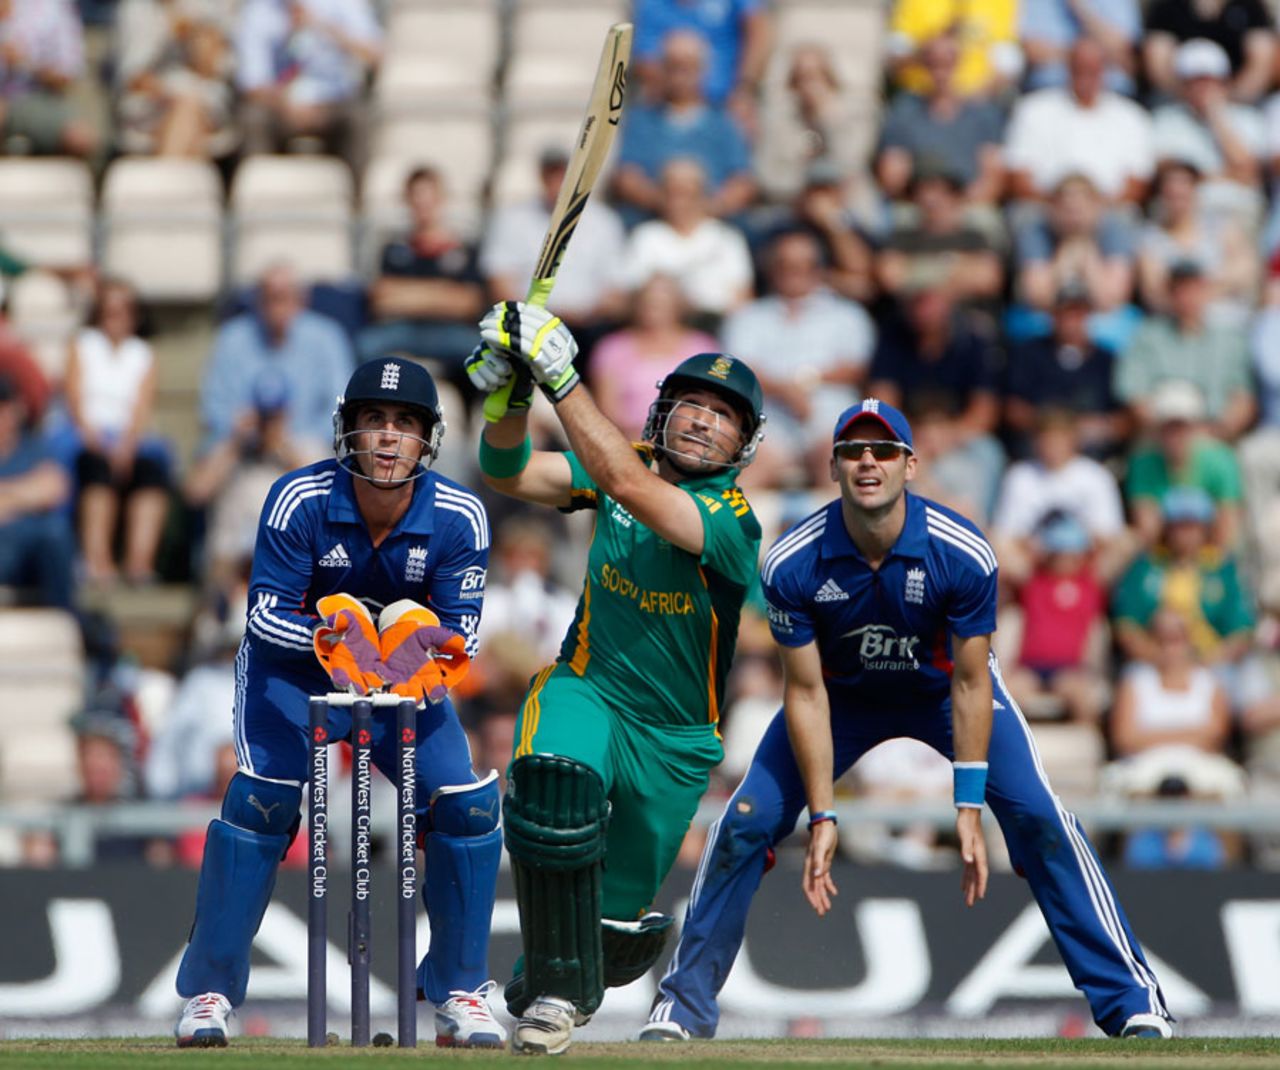 Dean Elgar made 15 in his first international innings, England v South Africa, 2nd NatWest ODI, West End, August 28, 2012